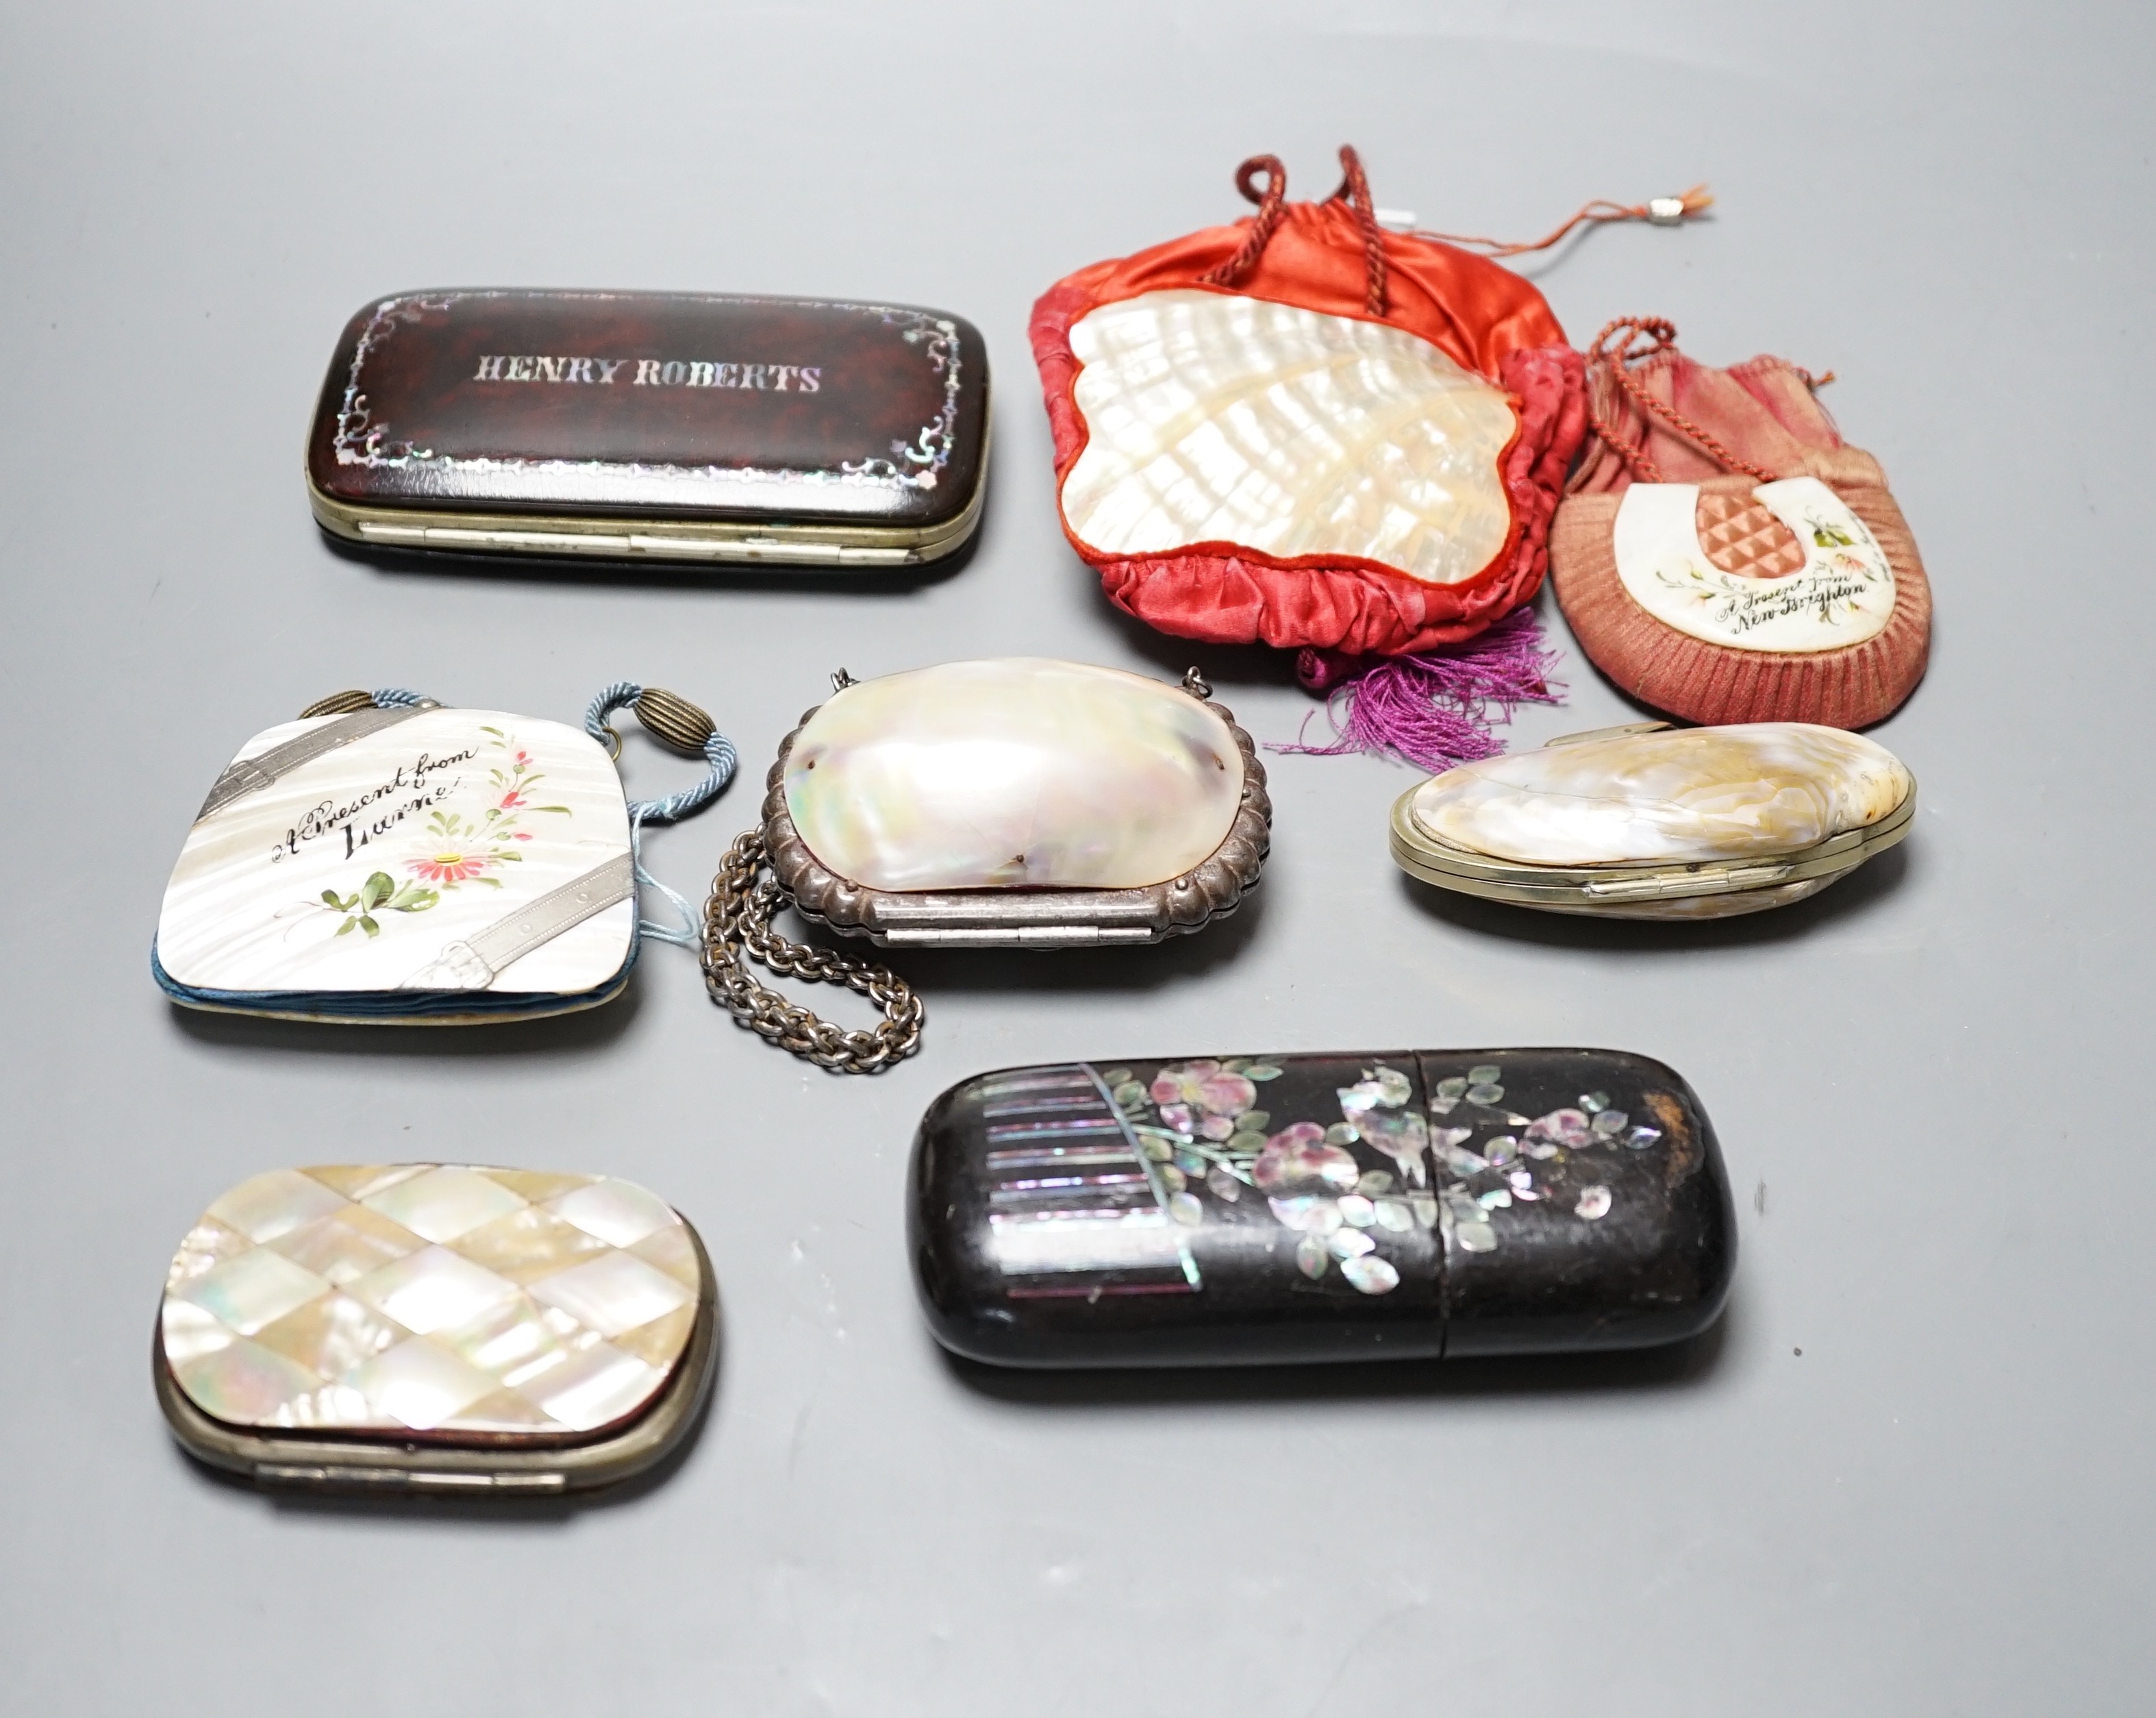 A collection of six mother of pearl souvenir purses, possibly from a grand tour and a papier-mâché mache card case and glasses case, card case 14 cms wide